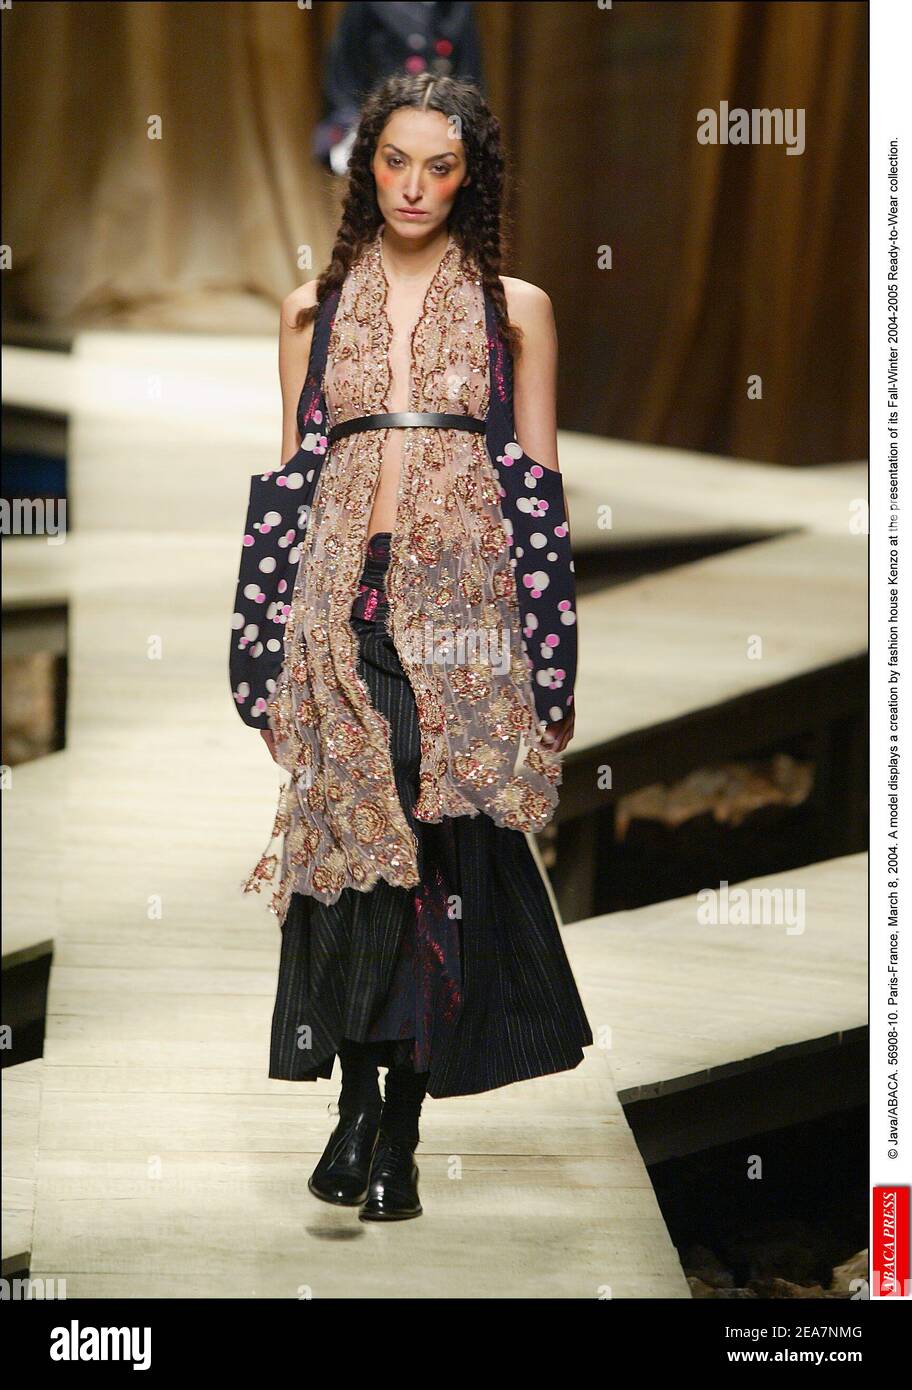 © Java/ABACA. 56908-10. Paris-France, March 8, 2004. A model displays a creation by fashion house Kenzo at the presentation of its Fall-Winter 2004-2005 Ready-to-Wear collection. Stock Photo